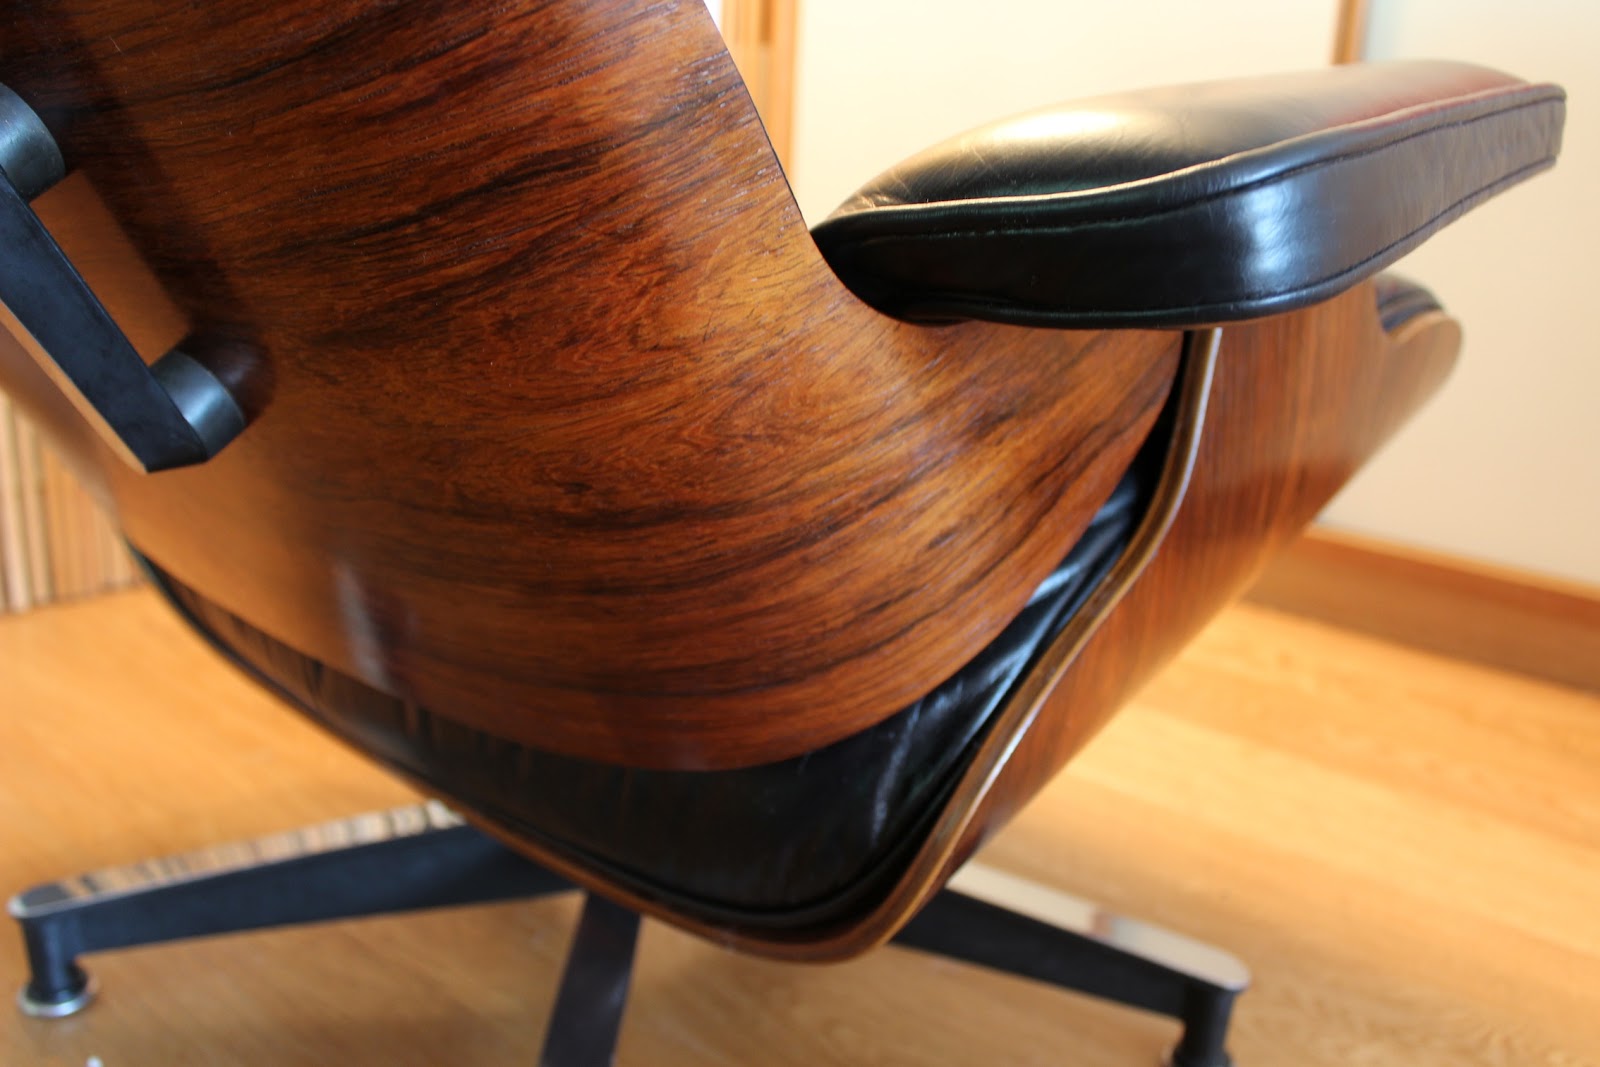 Brazilian Rosewood Furniture Images Pictures Becuo